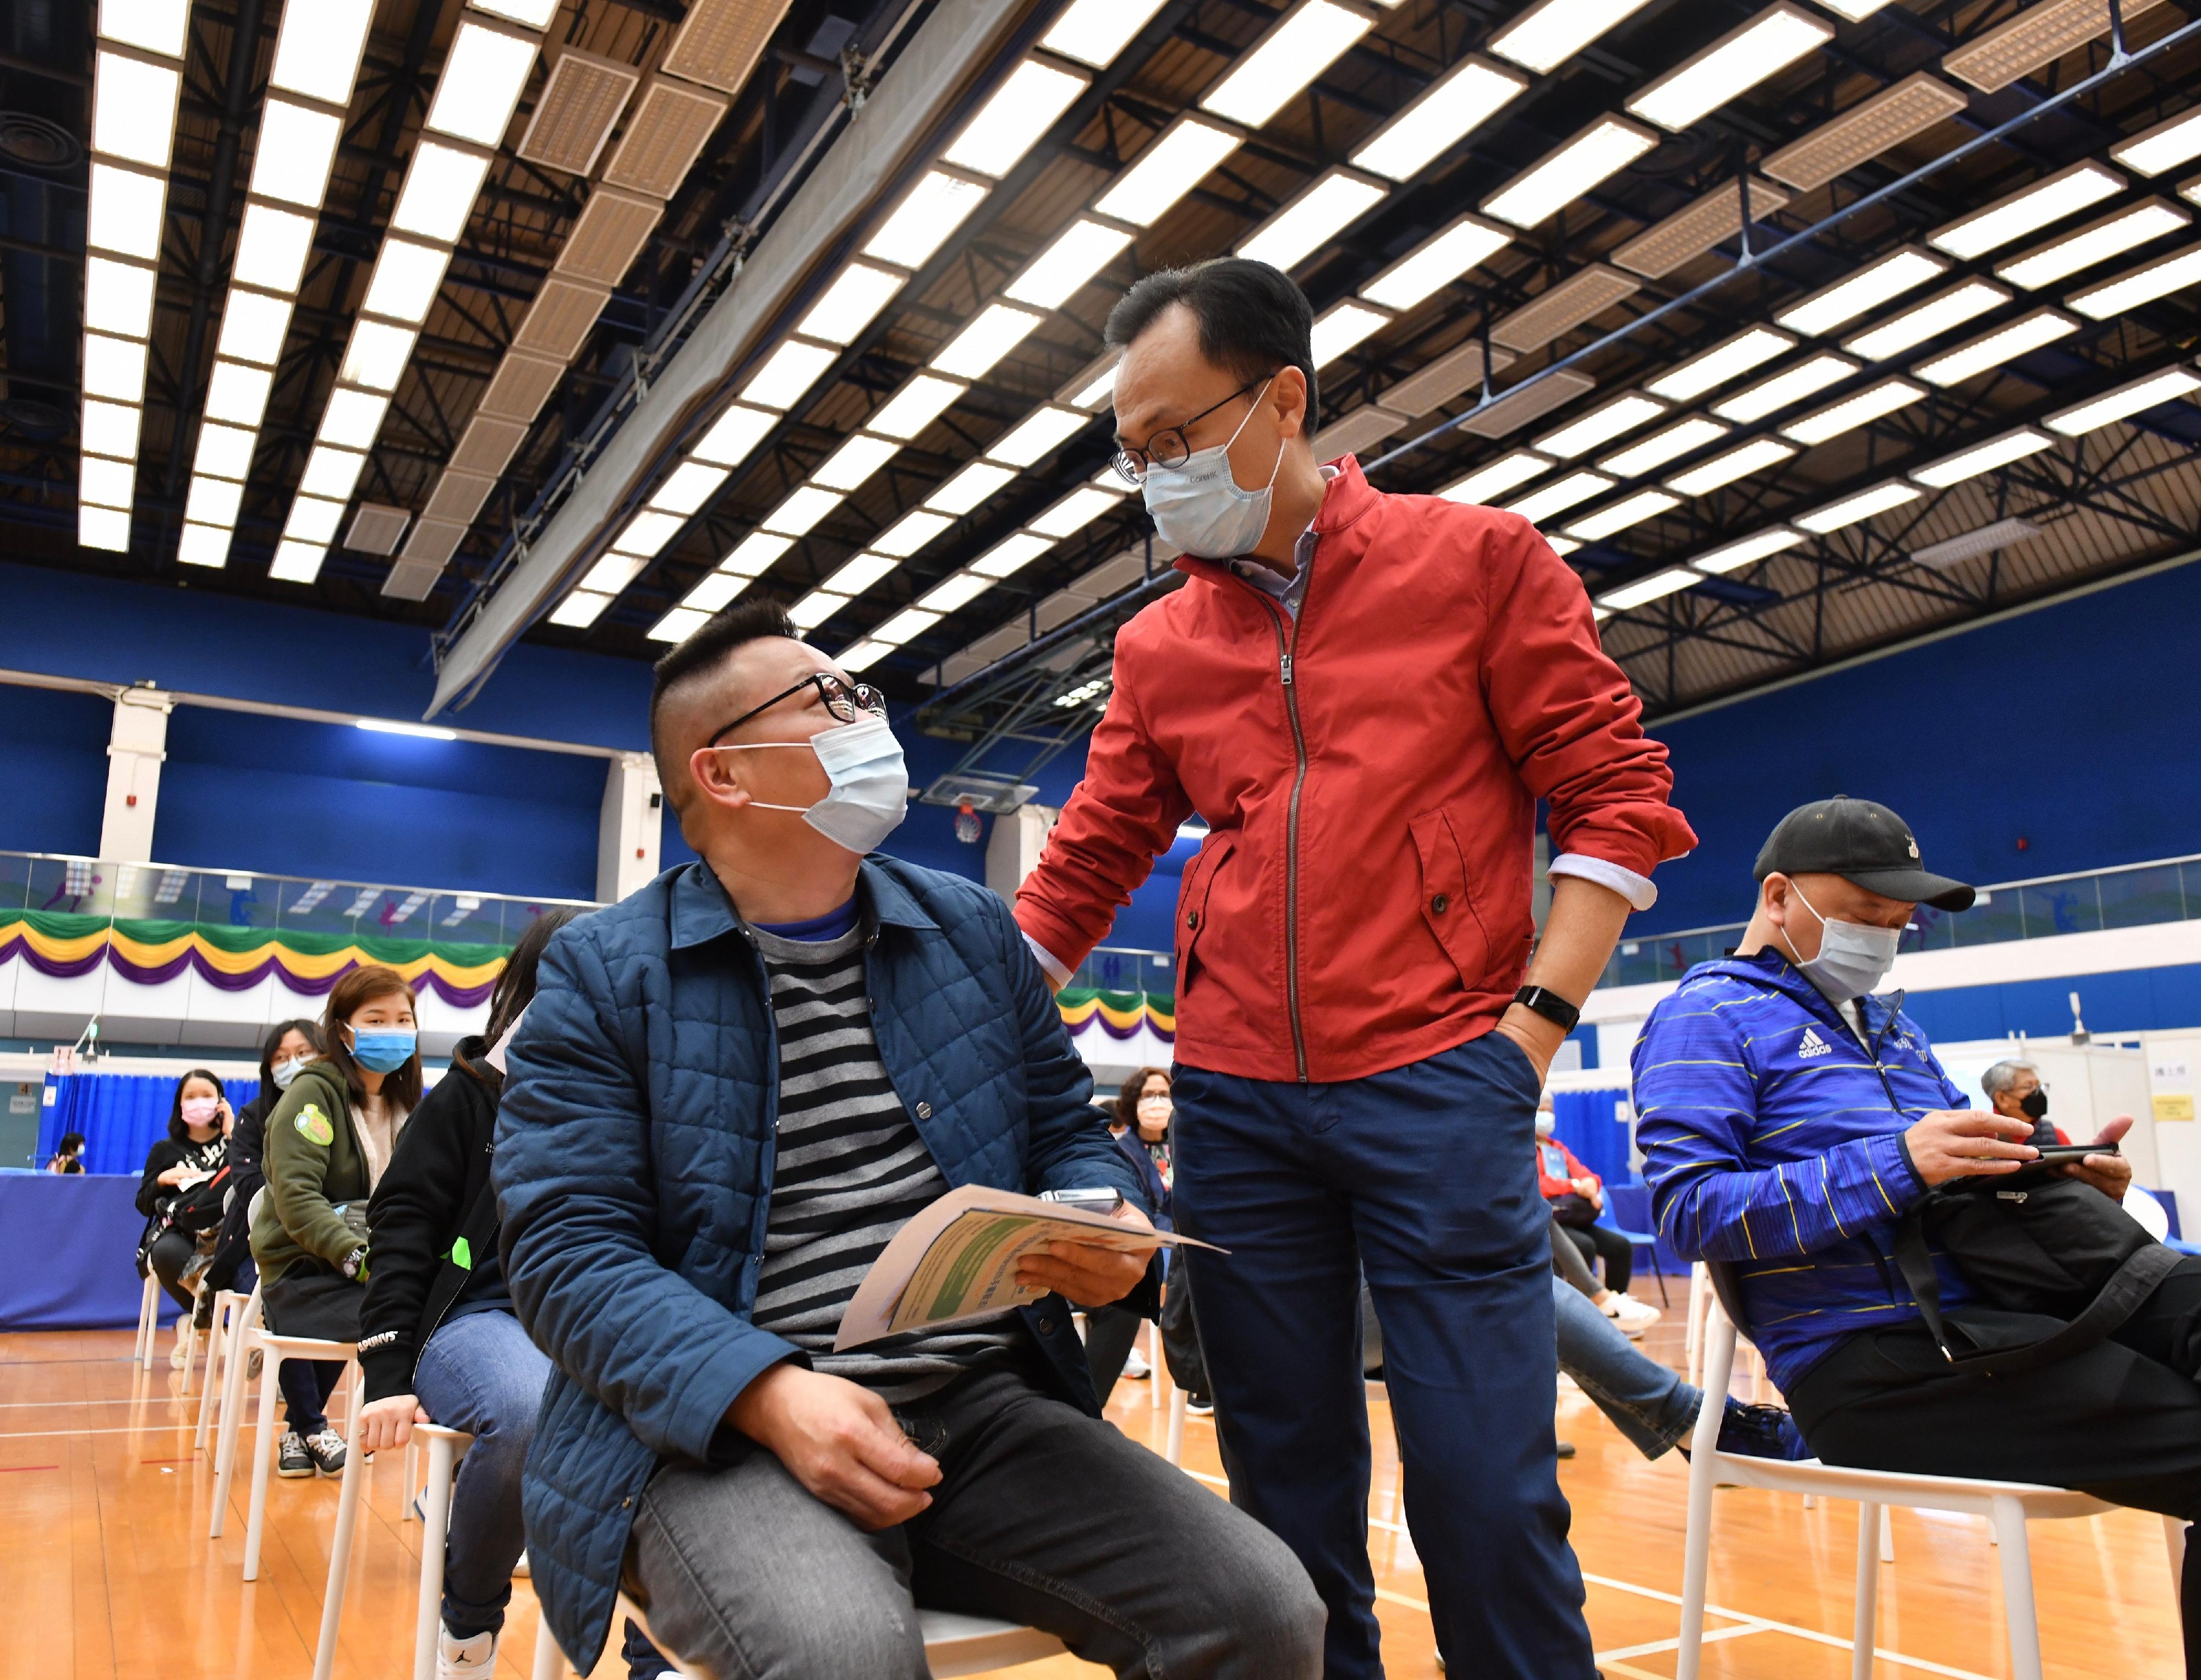 The Secretary for the Civil Service, Mr Patrick Nip, visited the Lai Chi Kok Park Sports Centre today (January 1) to see for himself the first day operation of the Community Vaccination Centre there after the extension of its opening hours. Photo shows Mr Nip (right) chatting with a member of the public after he received his third dose of COVID-19 vaccine.

